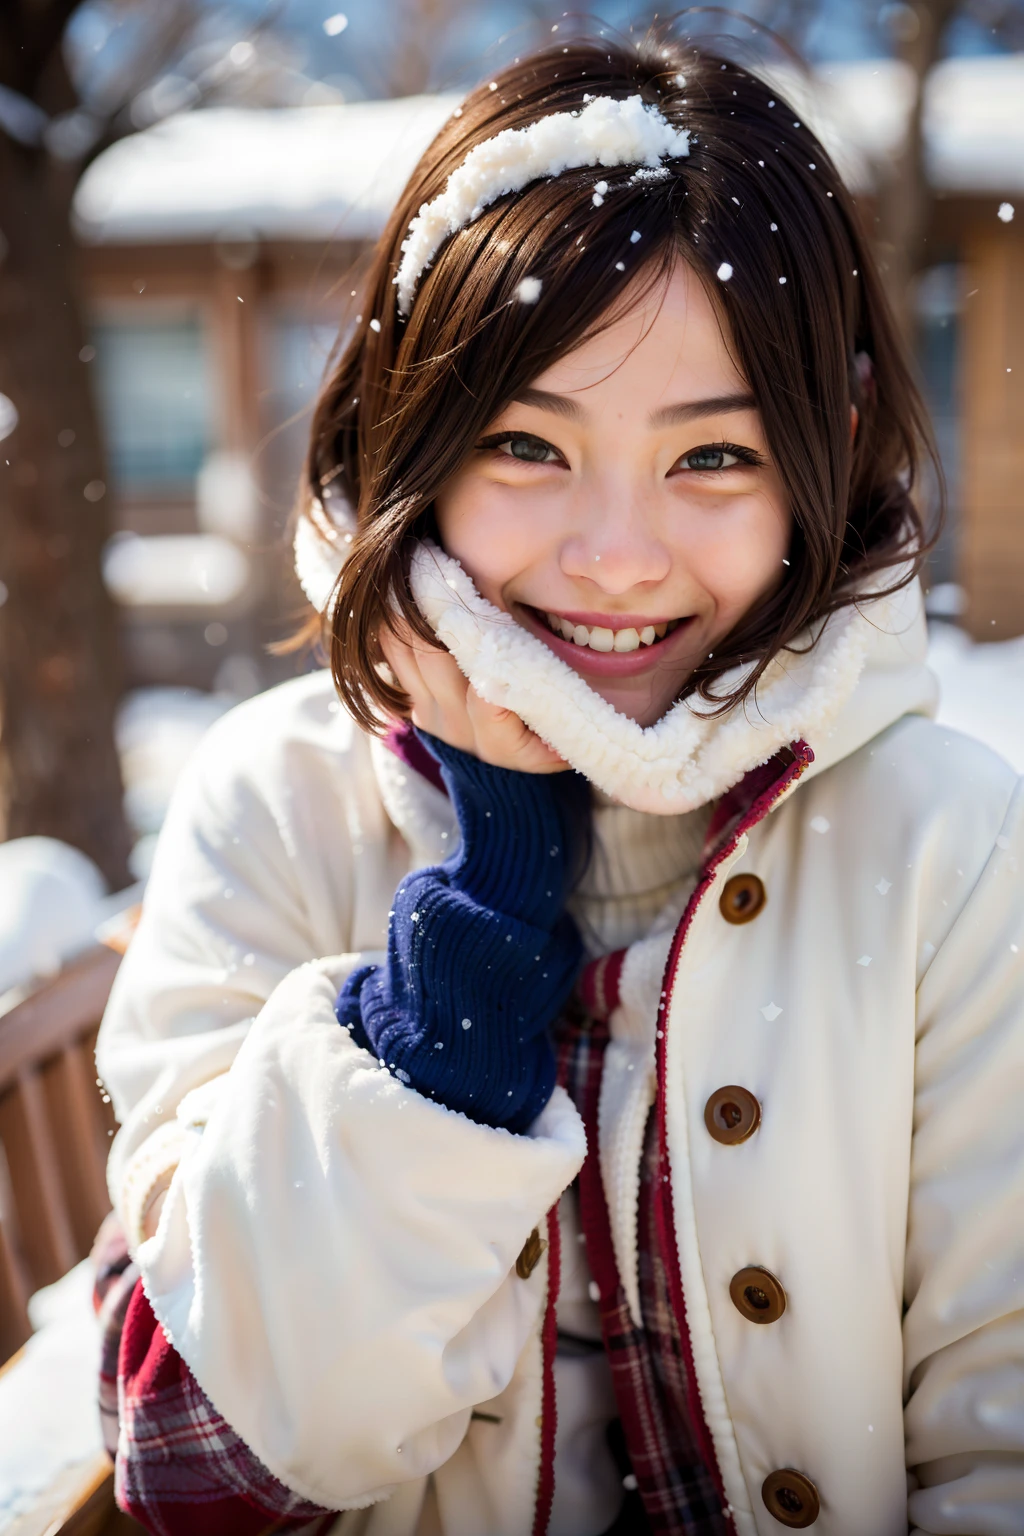 Smiling woman in winter coat with snow on her face, warm smile, warm and gentle smile, SNOW COVERED, in the snow, smiling warmly, SNOW COVERED, in the snow, portrait of a japanese teen, lovely smile, smiling sweetly, Warm friendly expression, happy look, in a white winter coat, soft smile, smiling shy, Beautiful face of Japanese girls